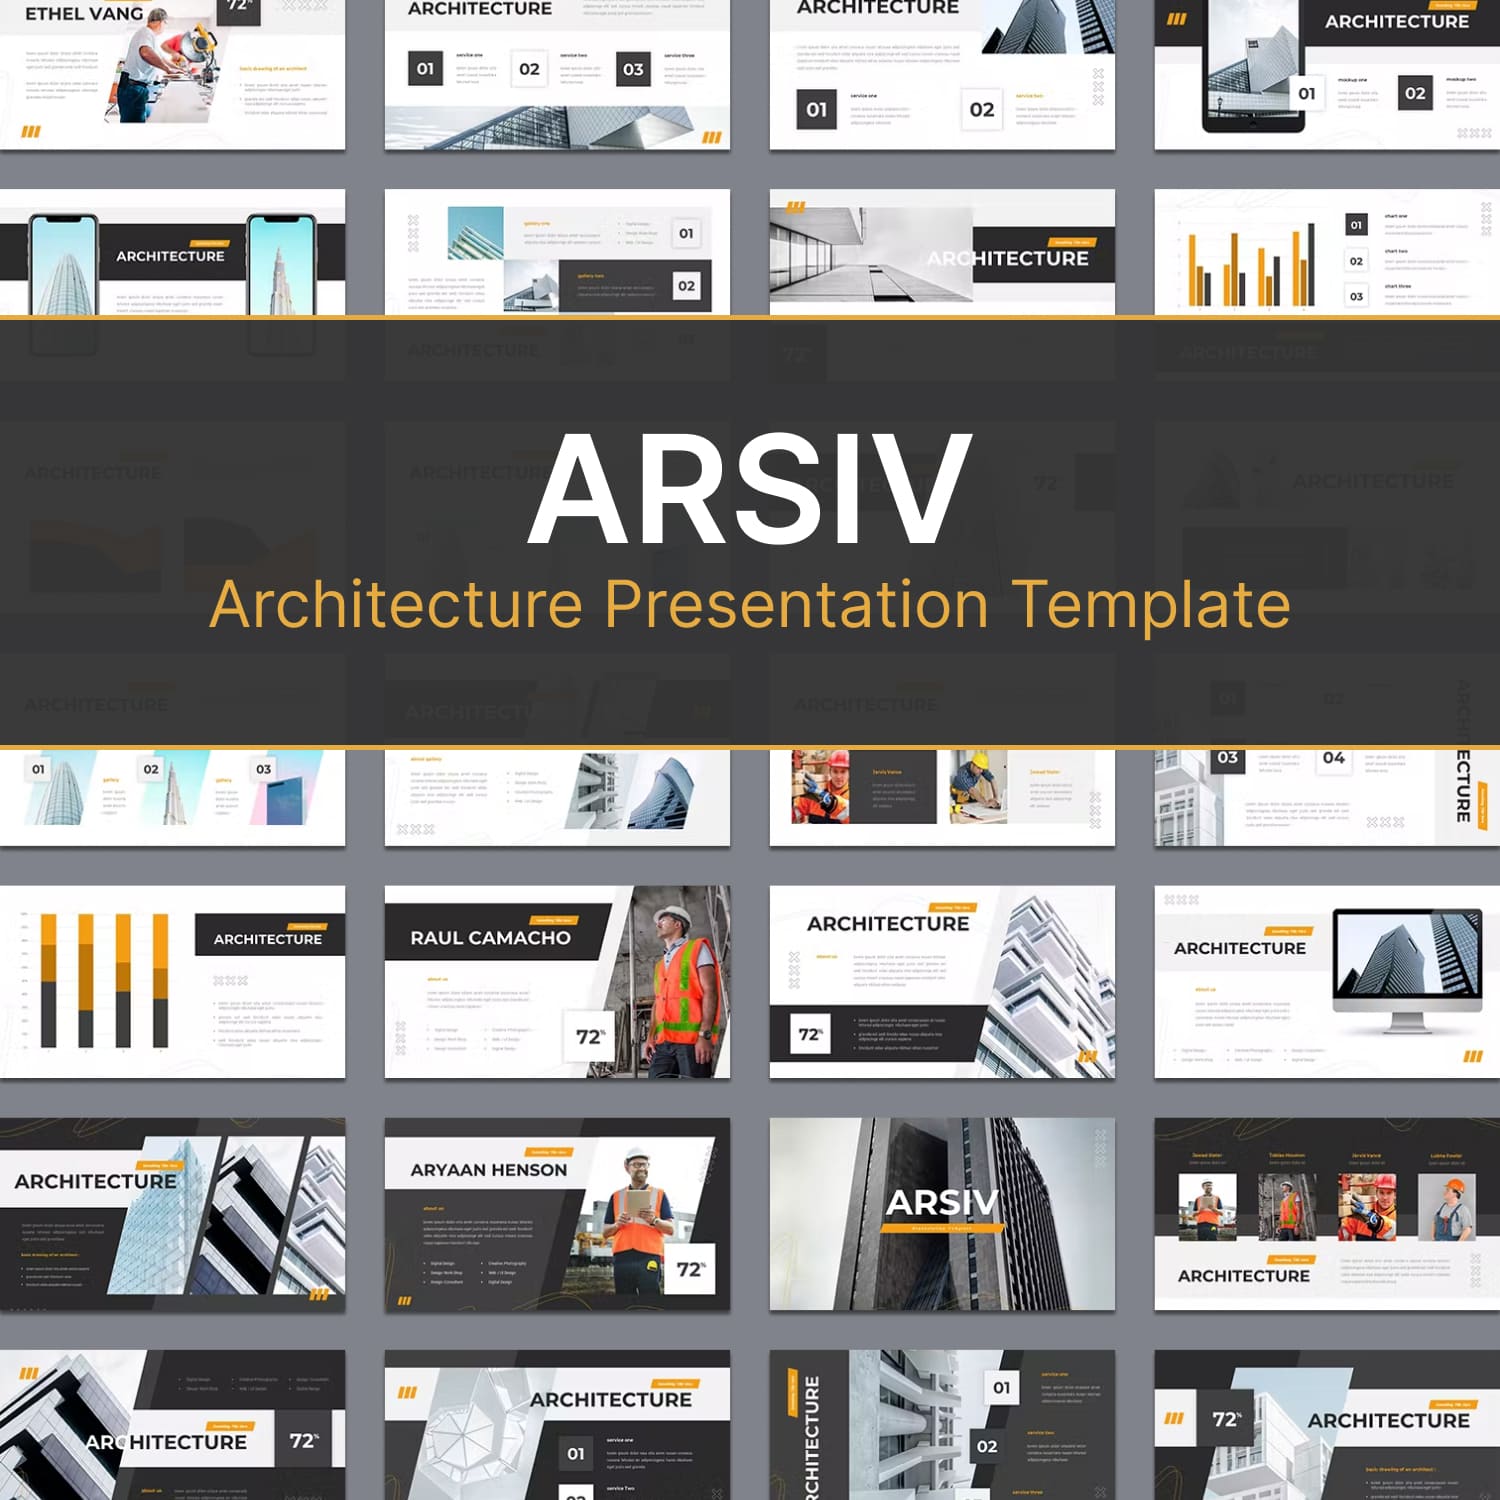 Architecture presentation template - main image preview.